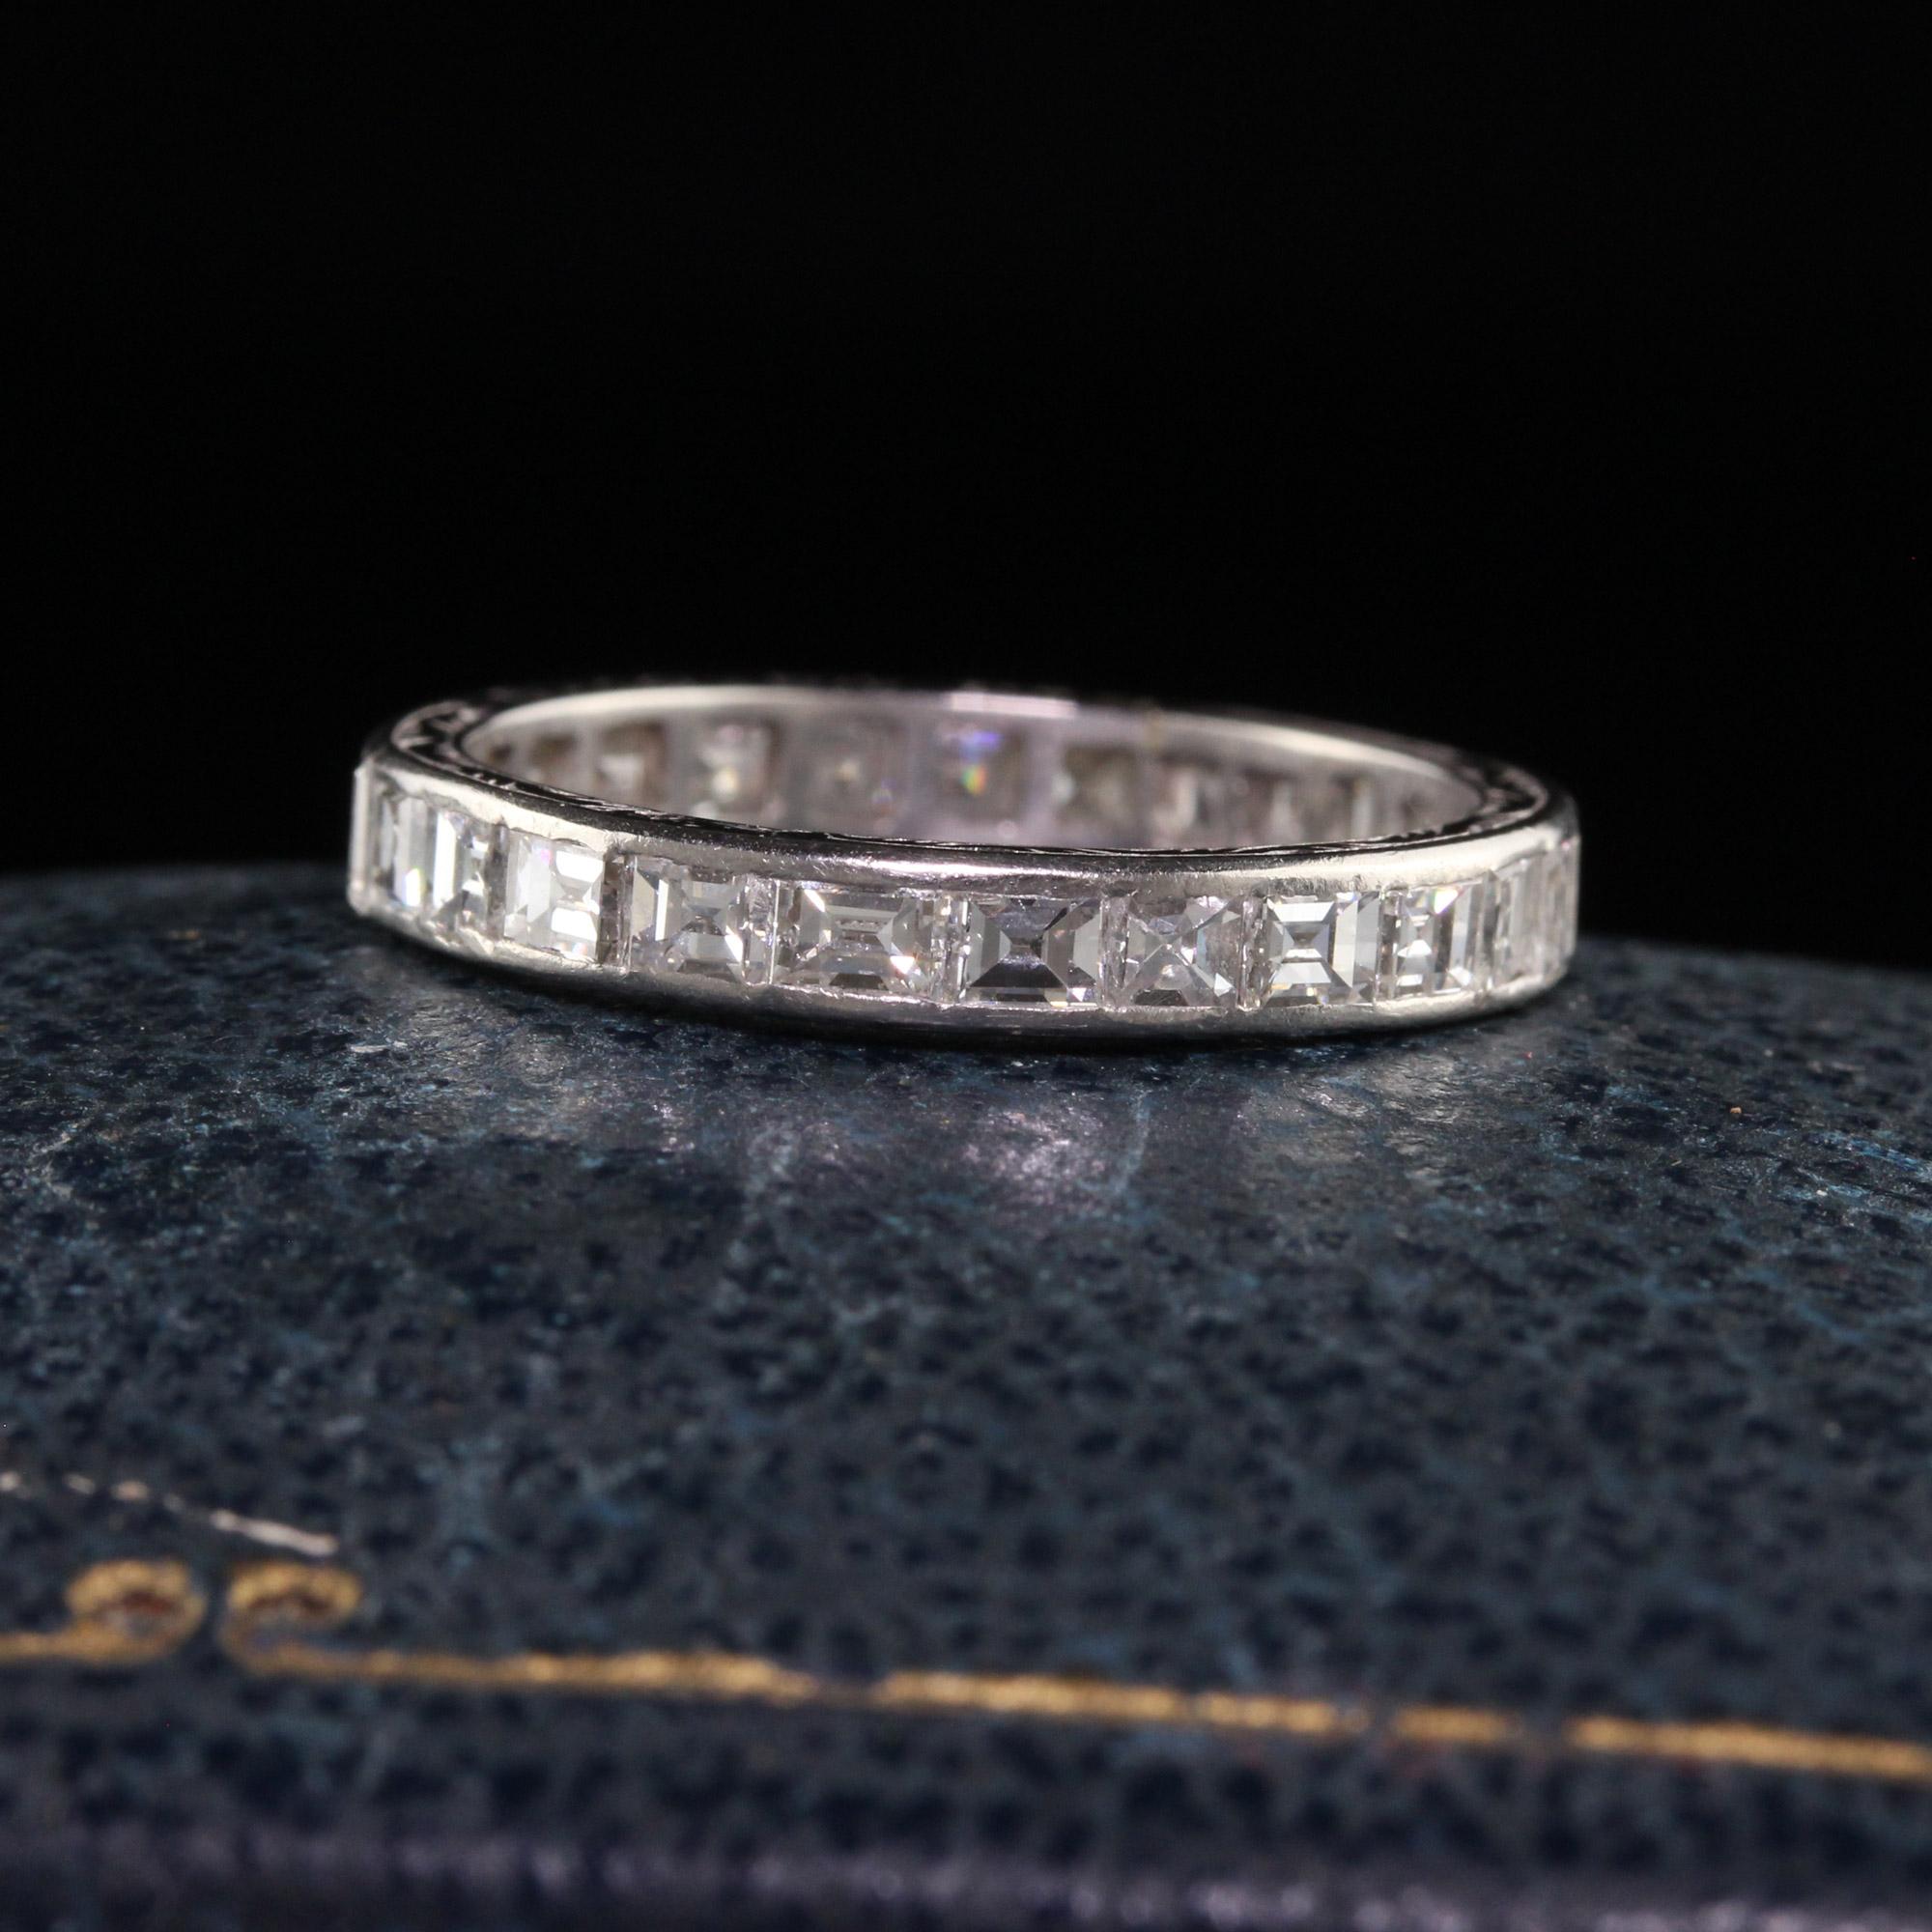 Beautiful Vintage Retro Platinum Engraved Carre Cut Diamond Eternity Band. This beautiful band is crafted in platinum. There are carre cut diamonds going around the entire ring and the size of the band is engraved 